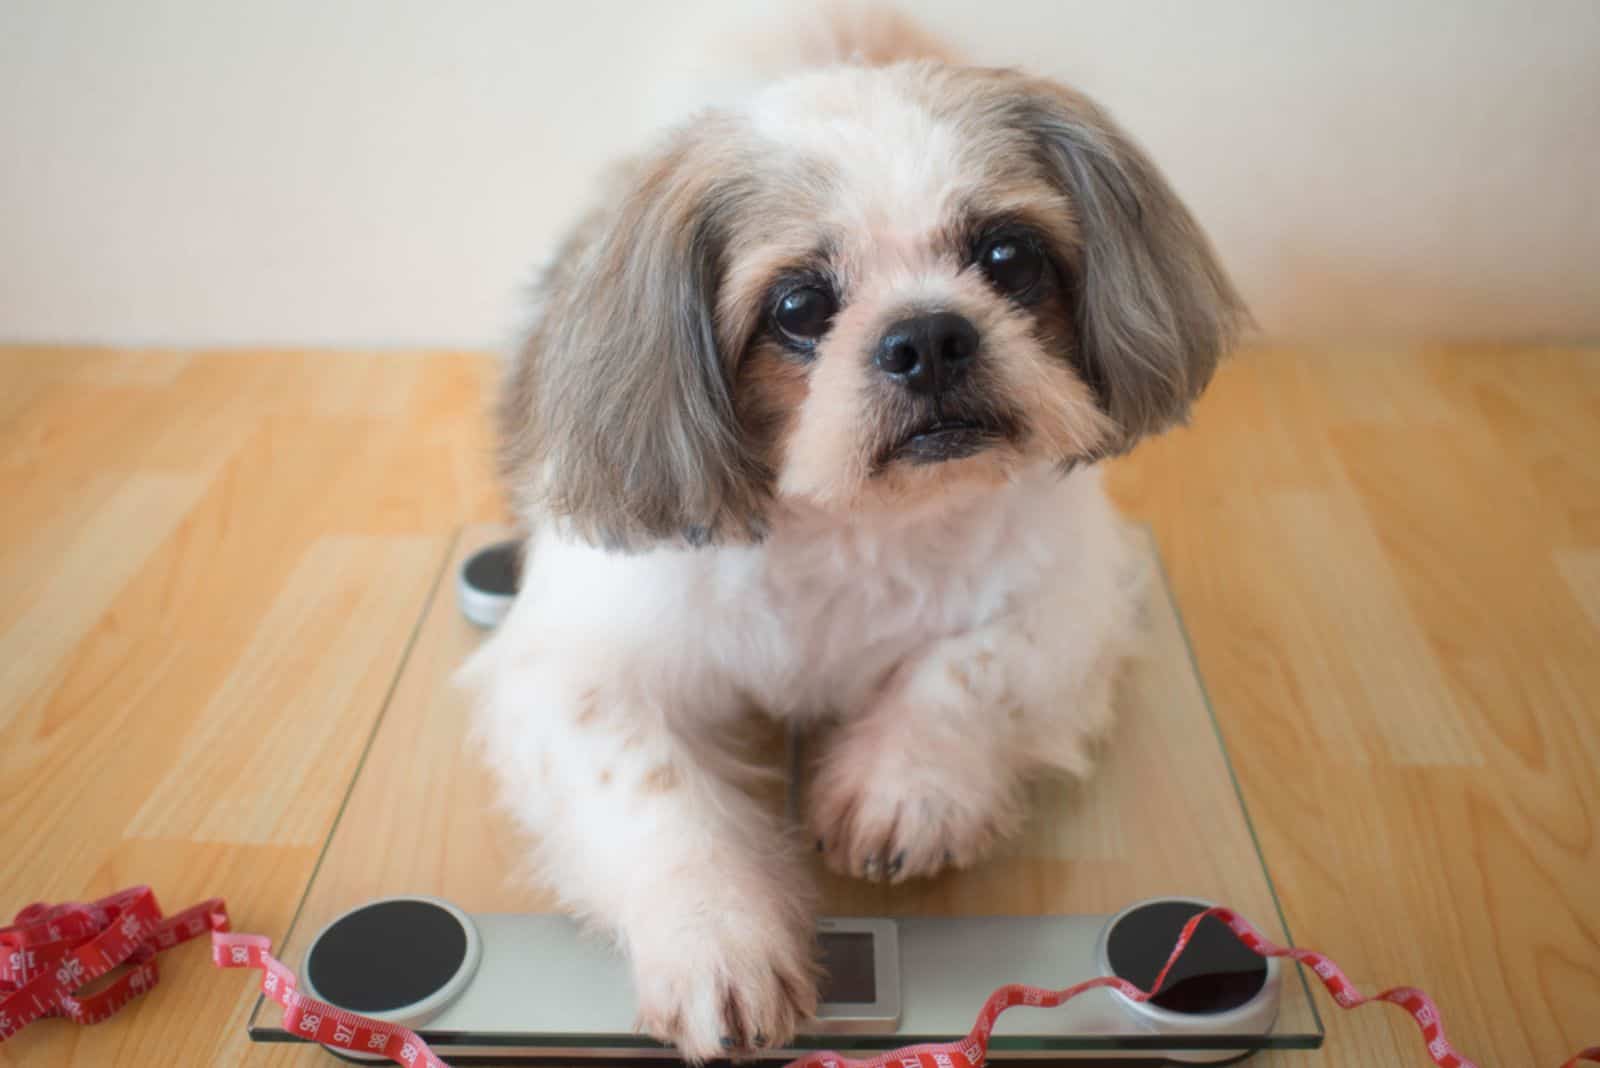 Fat Shih Tzu: How To Help Your Pet To Get Back On Track